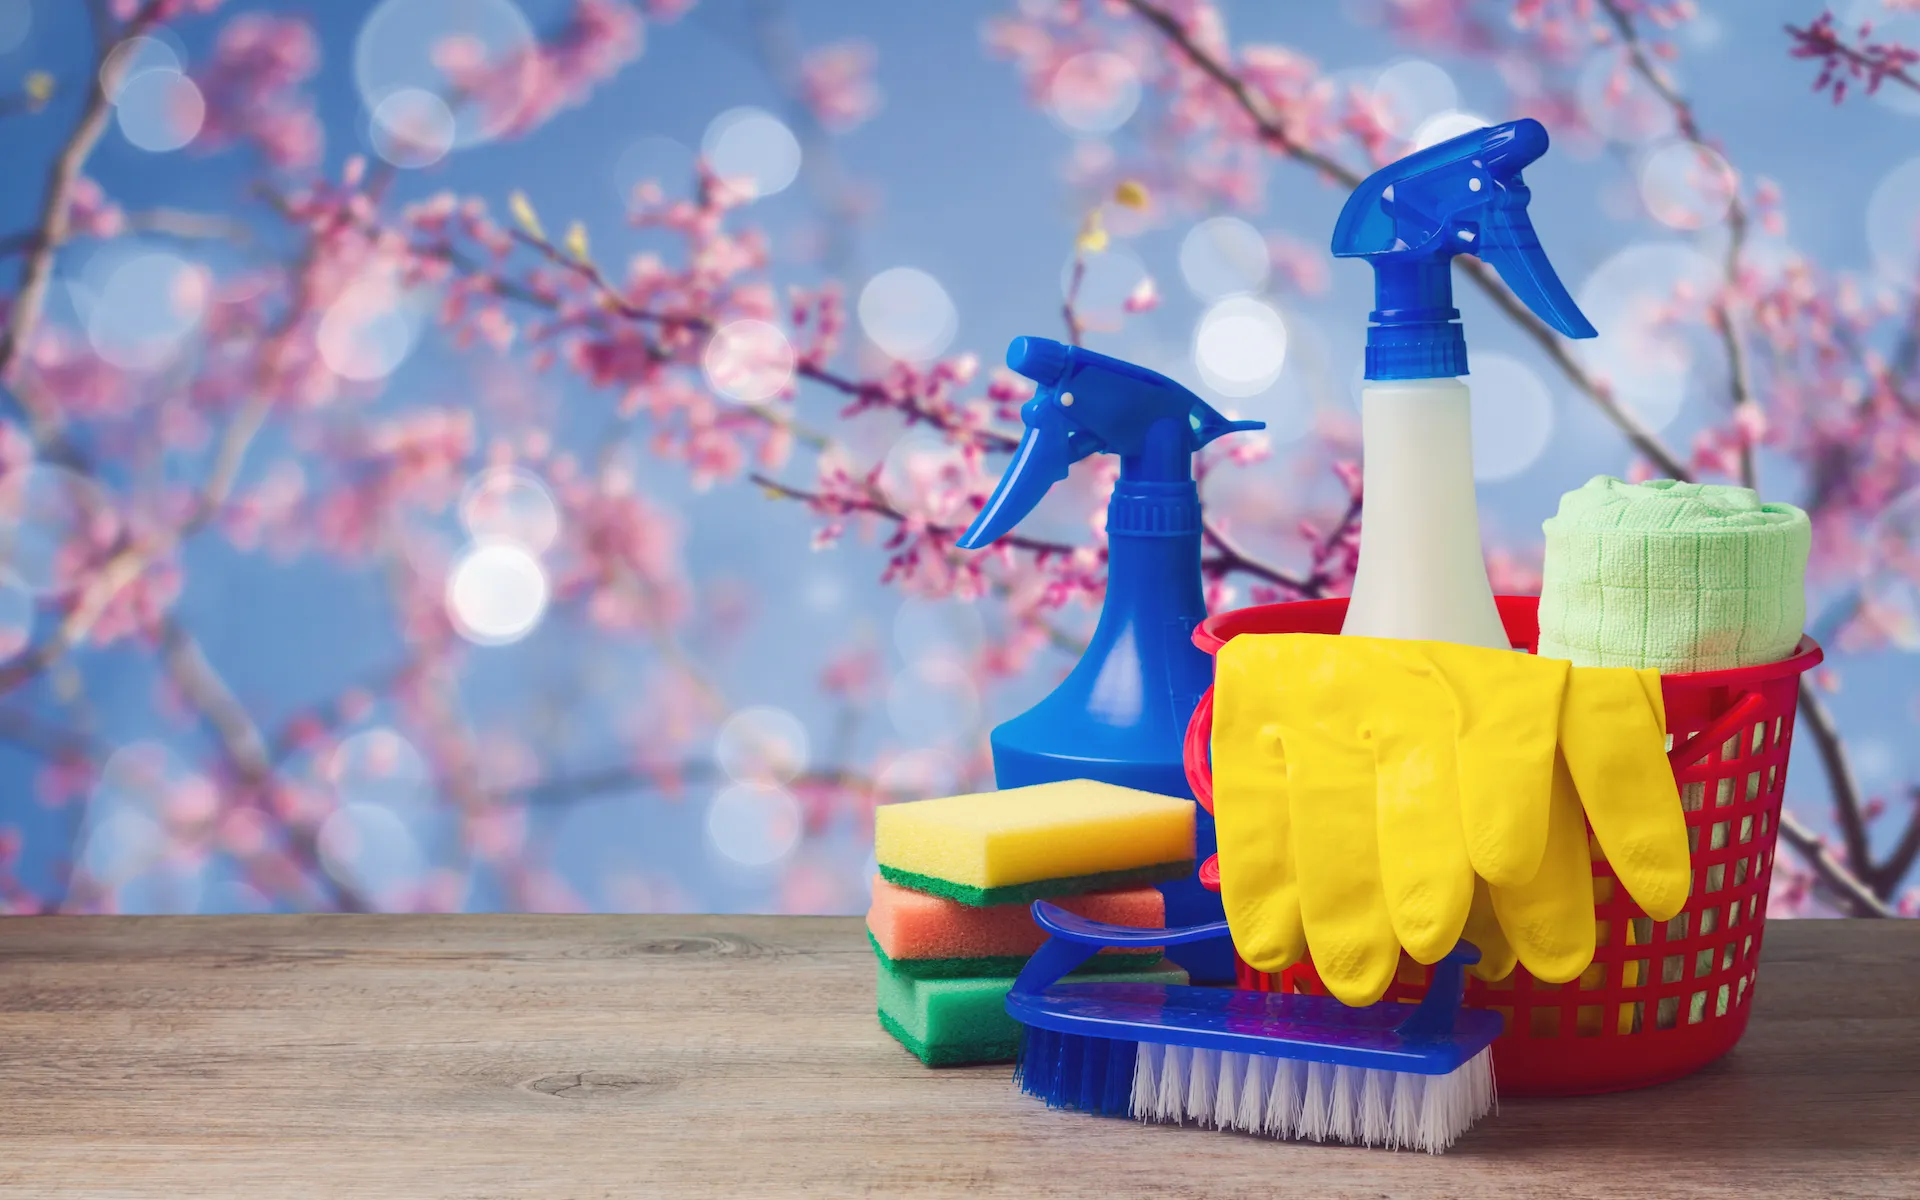 Get Your House in Order: Spring Cleaning Tips